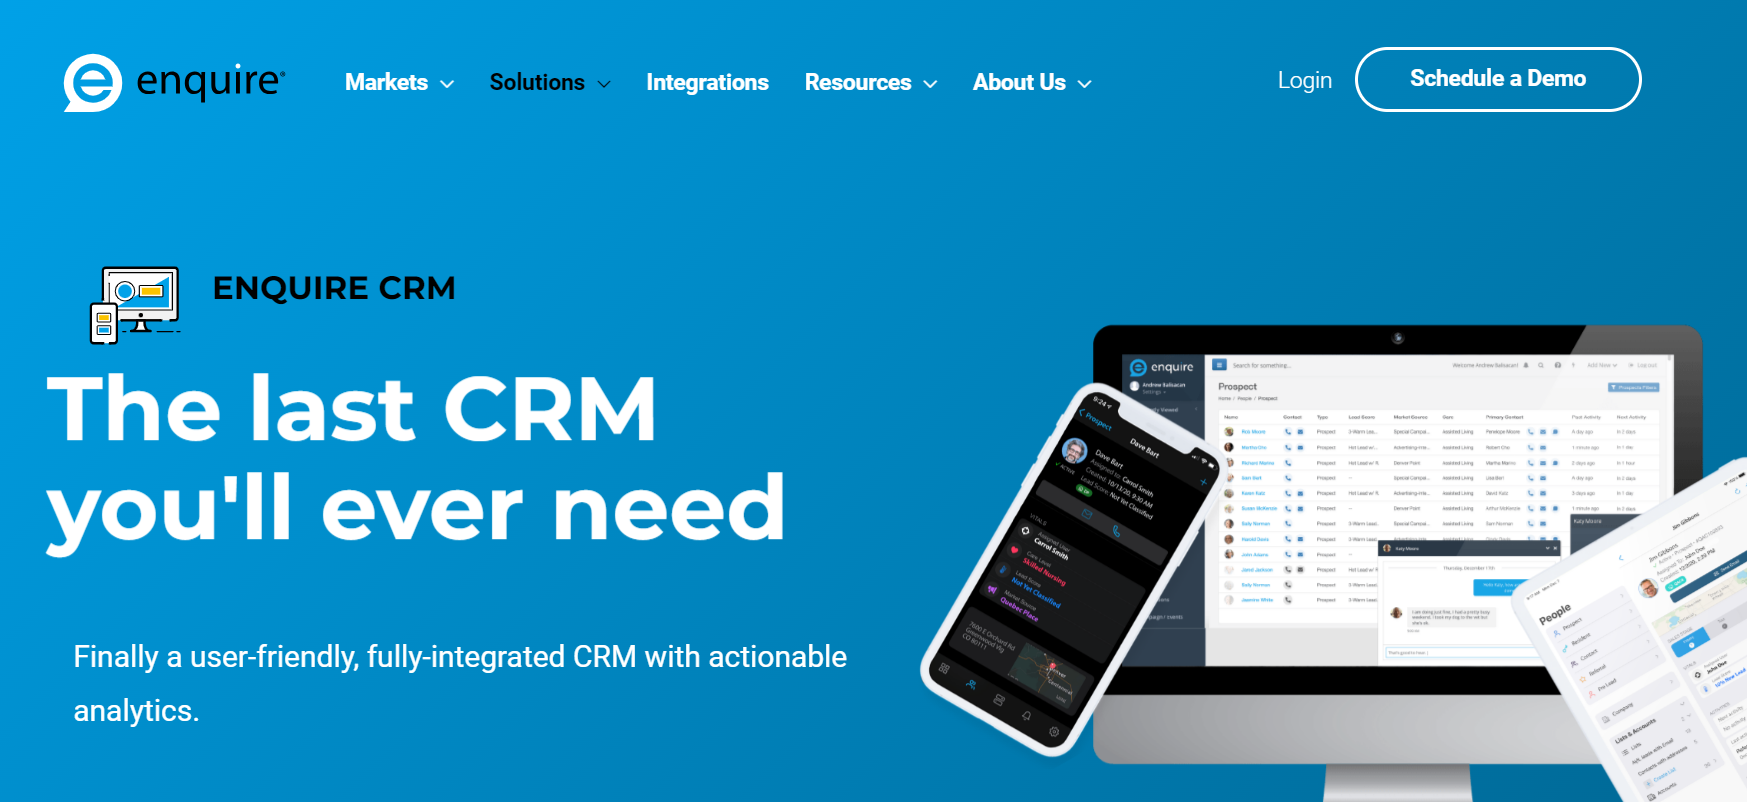 5 Best HIPAA-Compliant CRM Software